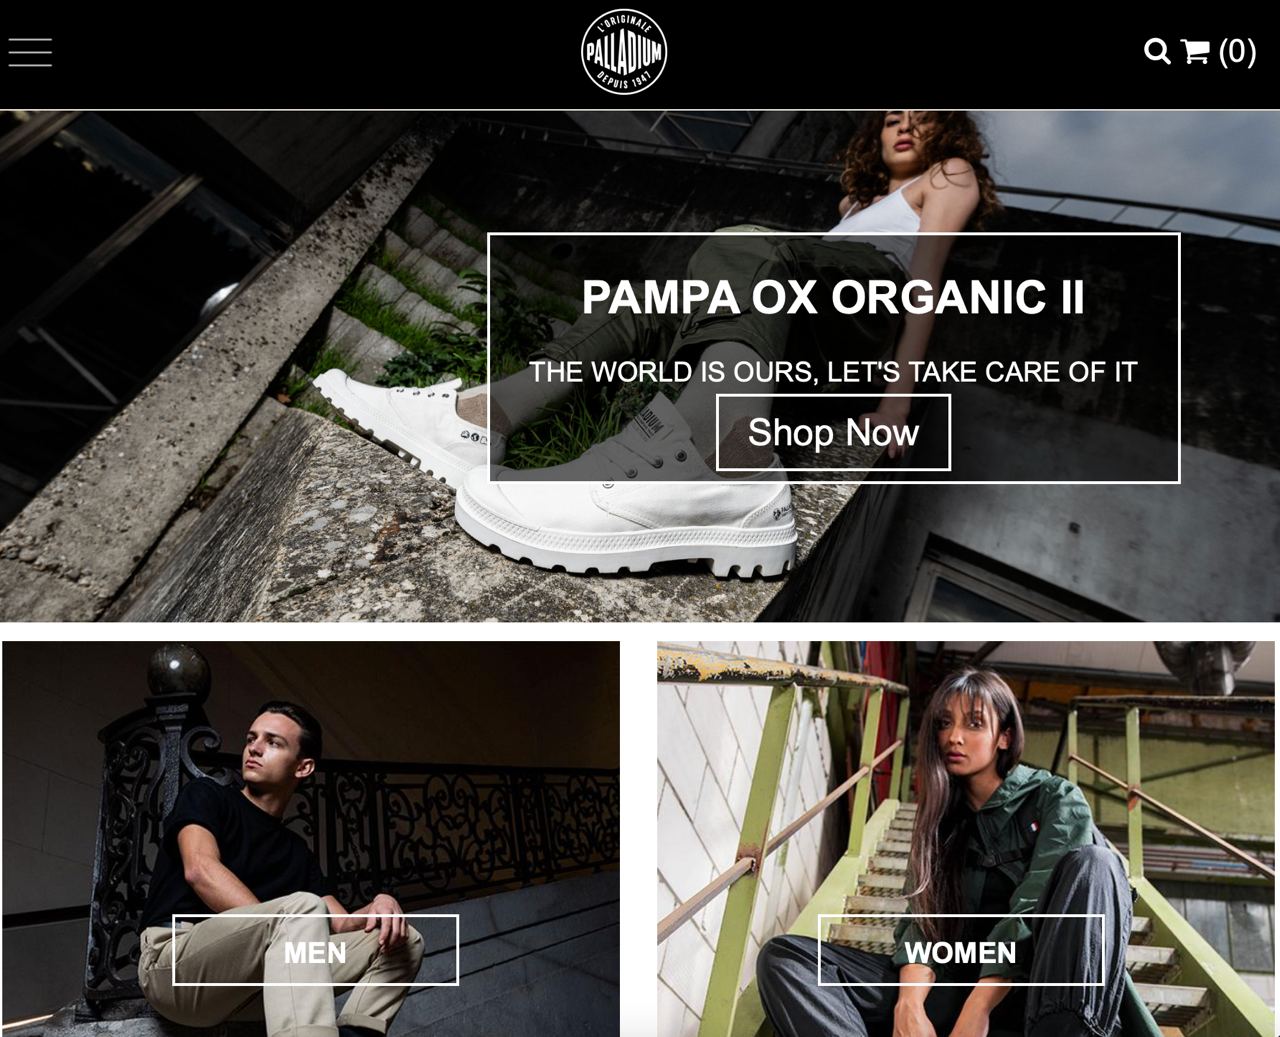 A screenshot of a shopping website showing three models posing in separate shots.